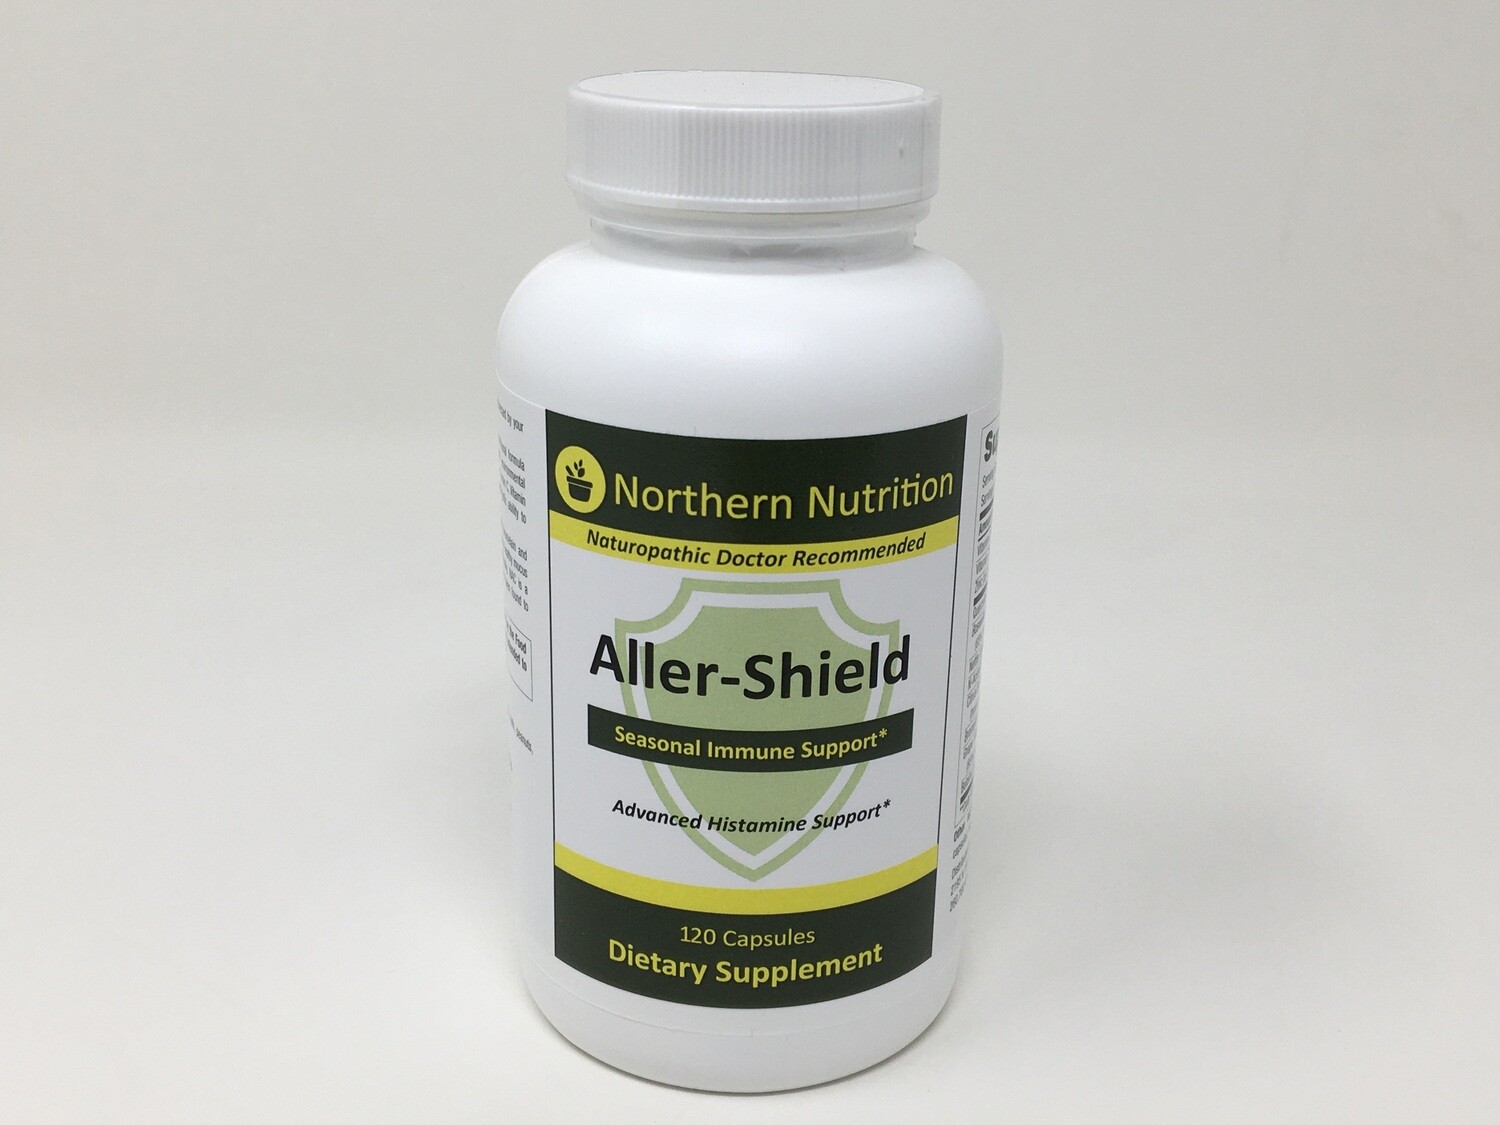 Aller-Shield 120 capsules (Northern Nutrition)